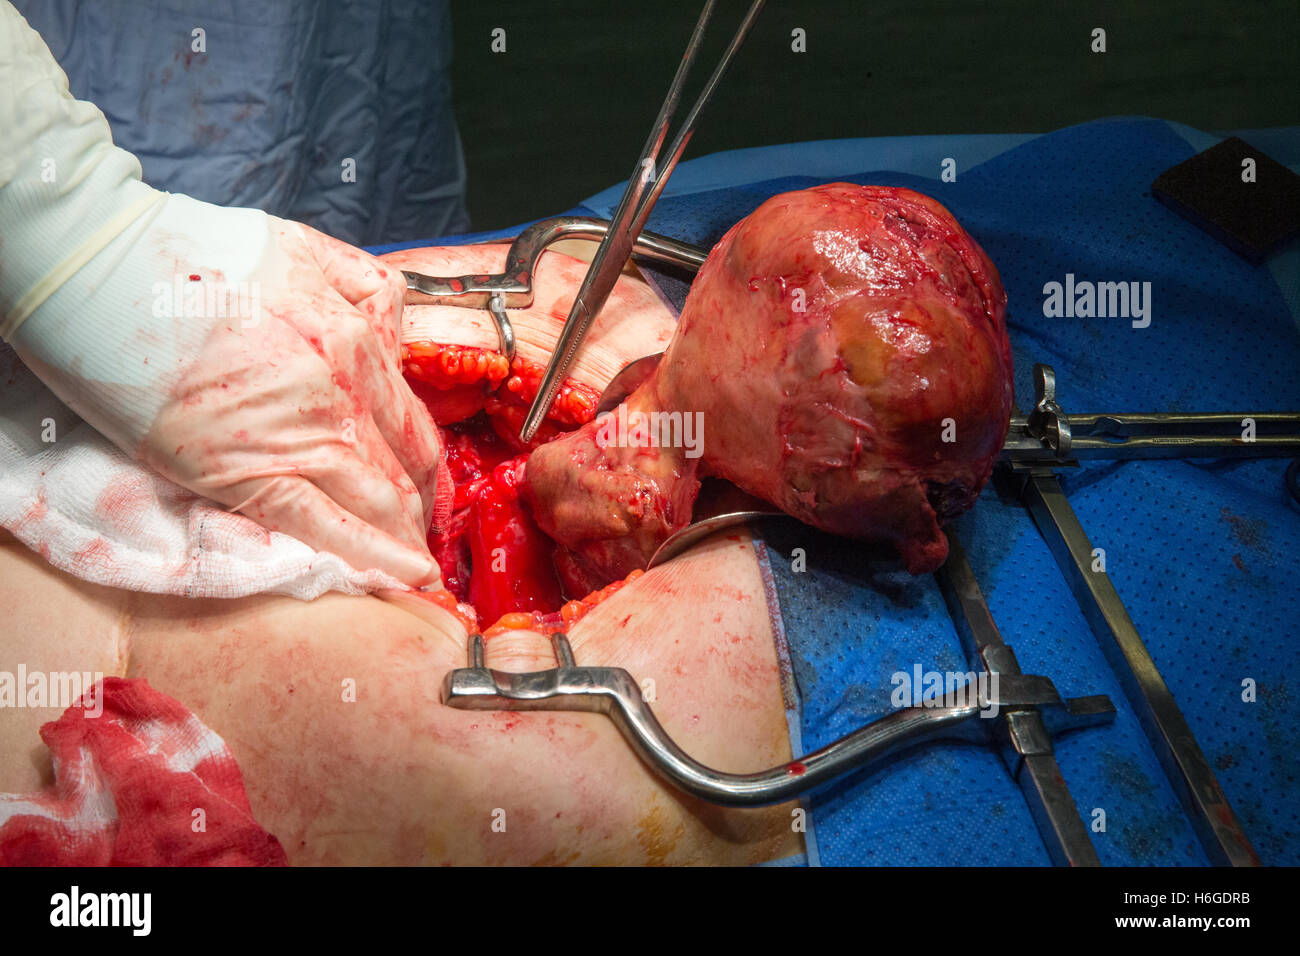 A twisted Fibroid is revealed during an operation to resolve the issue for the patient Stock Photo